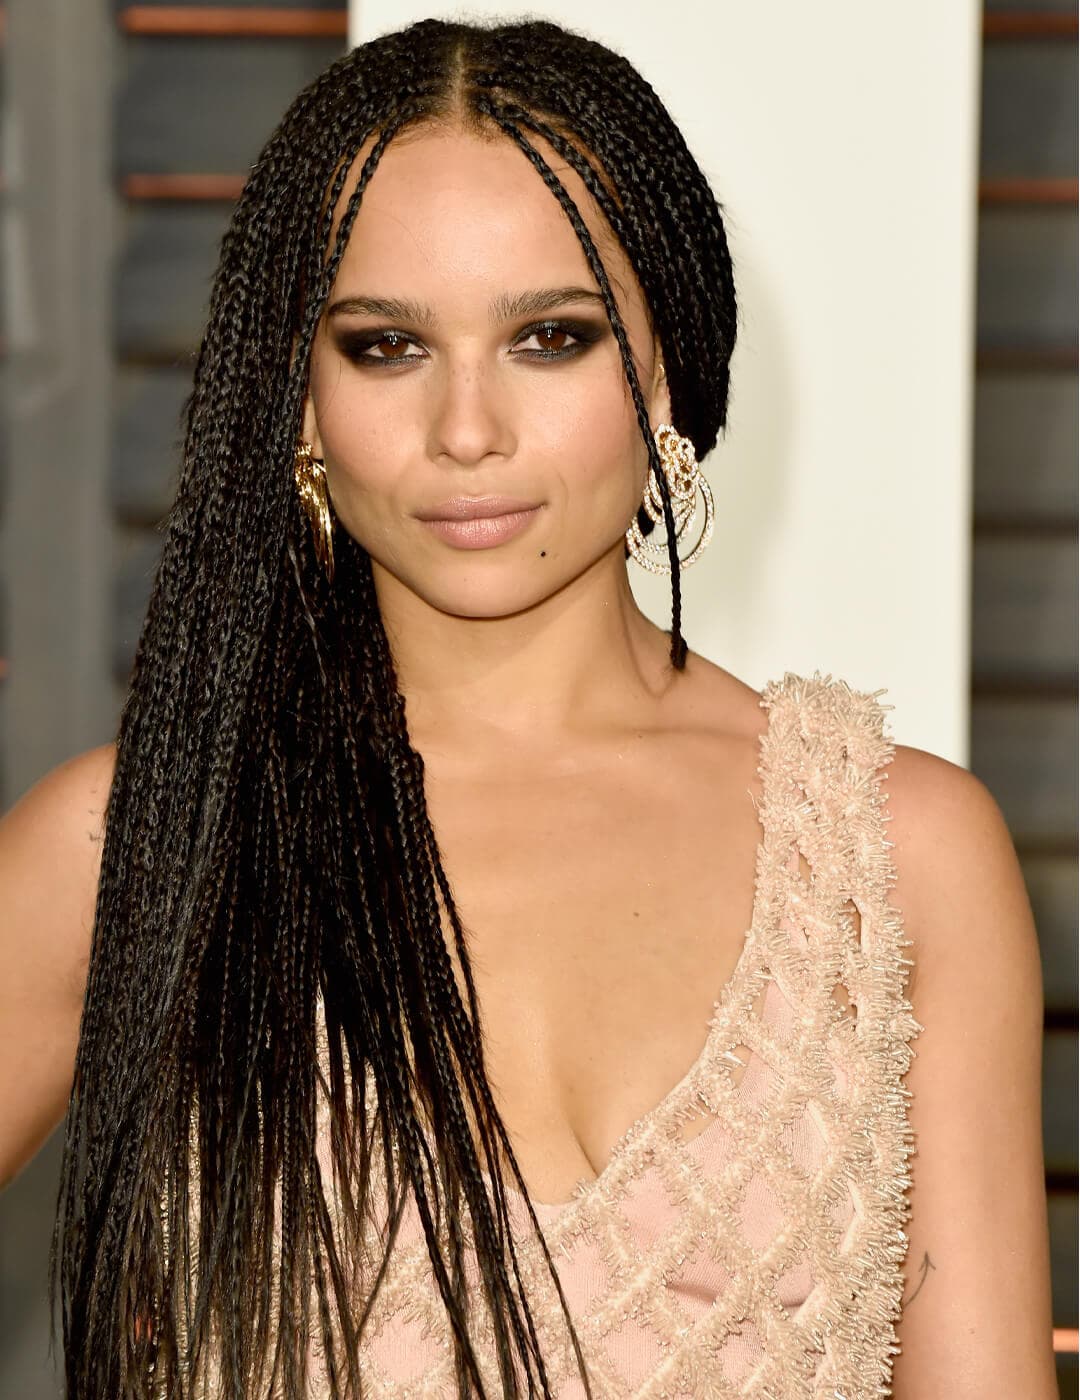 Zoe Kravitz rocking a micro braided hairstyle in a nude pink feathery dress